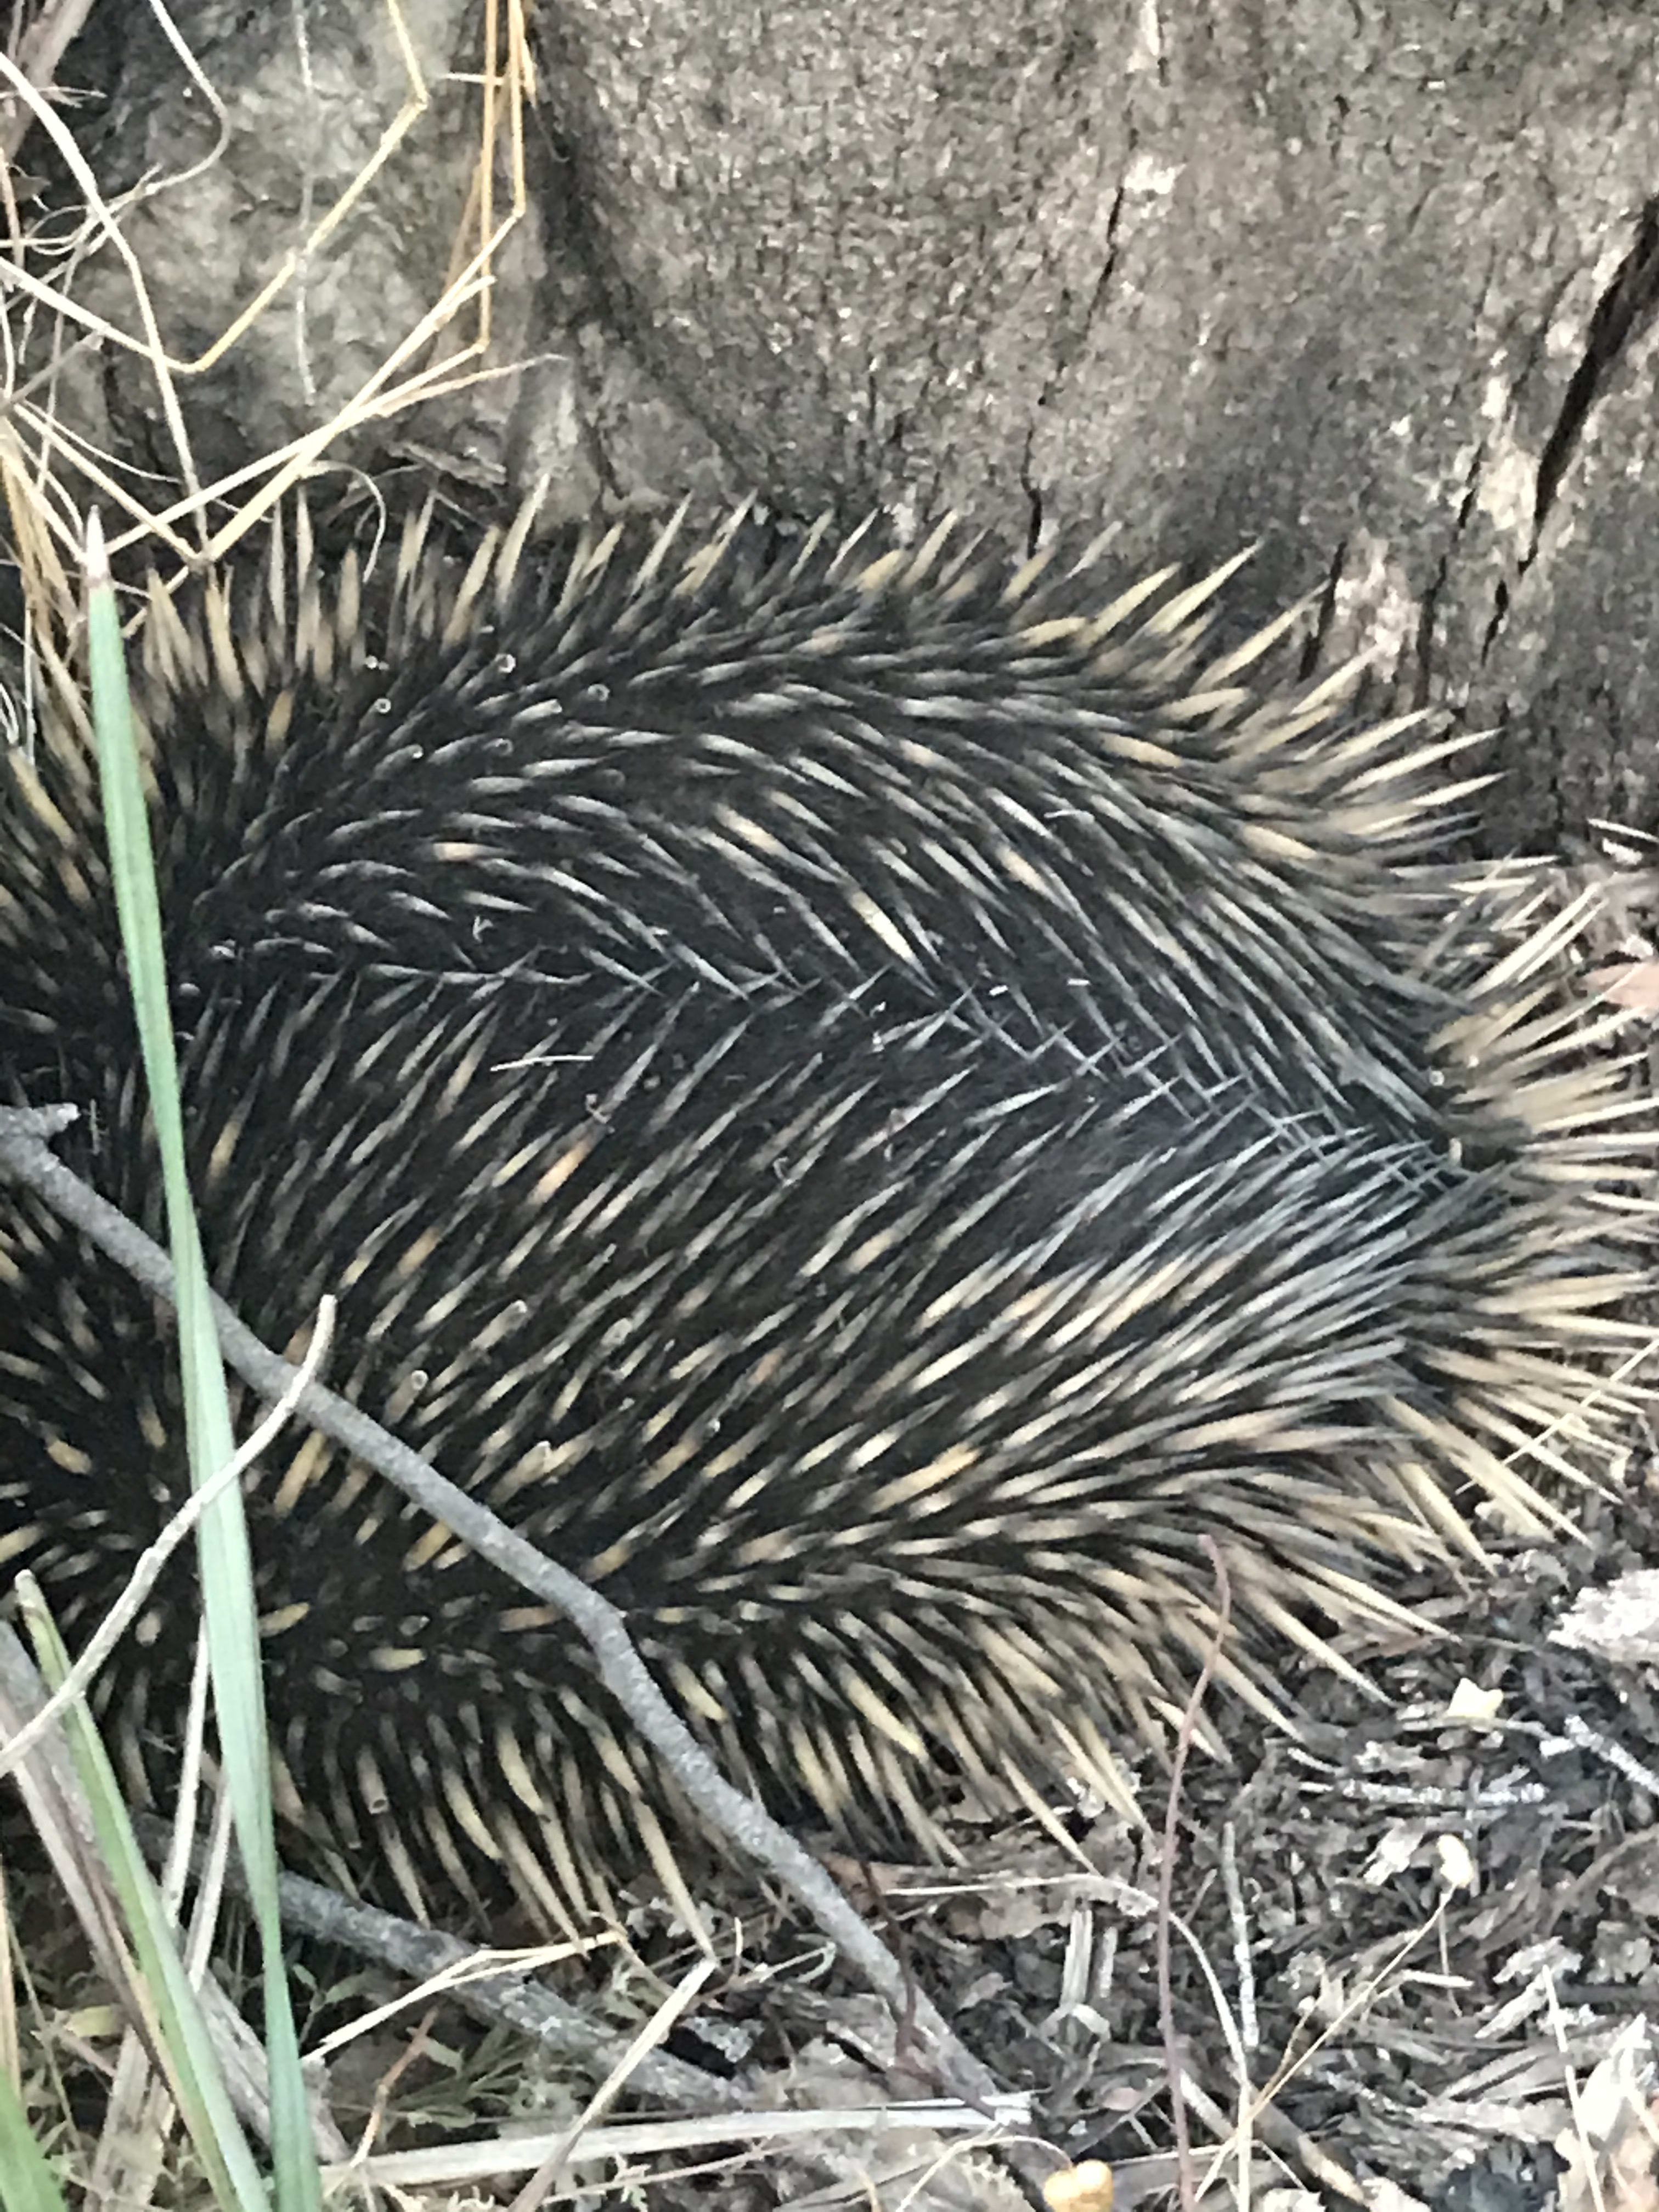 our resident echidna